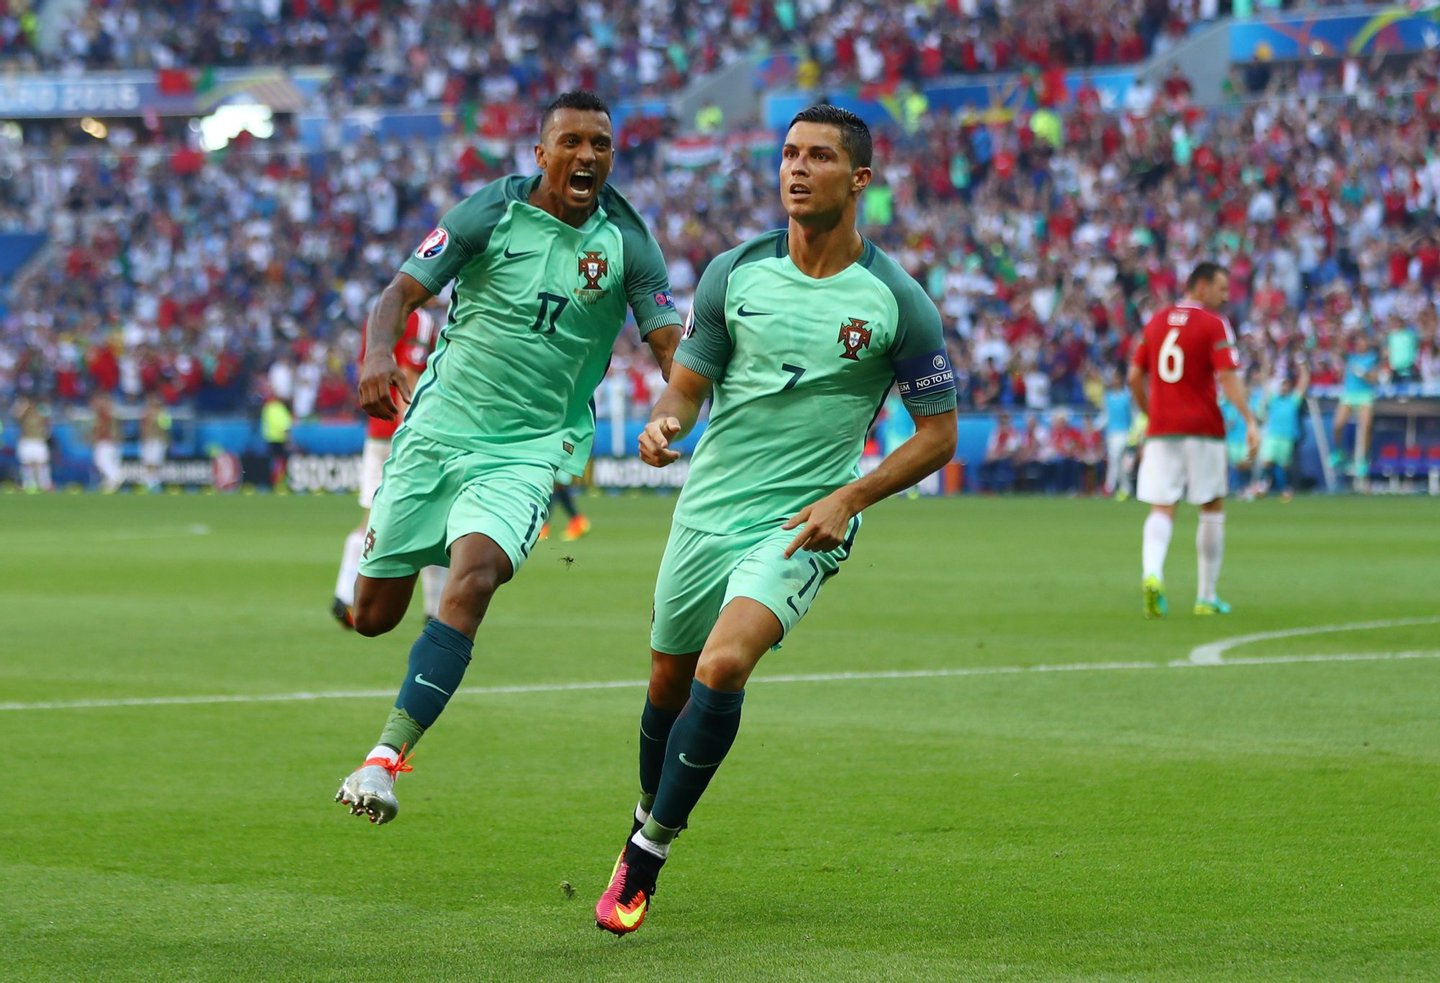 LYON, FRANCE - JUNE 22: Cristiano Ronaldo (R) of Portugal celebrates scoring his team's second goal with his team mate Nani (L) during the UEFA EURO 2016 Group F match between Hungary and Portugal at Stade des Lumieres on June 22, 2016 in Lyon, France. (Photo by Michael Steele/Getty Images)